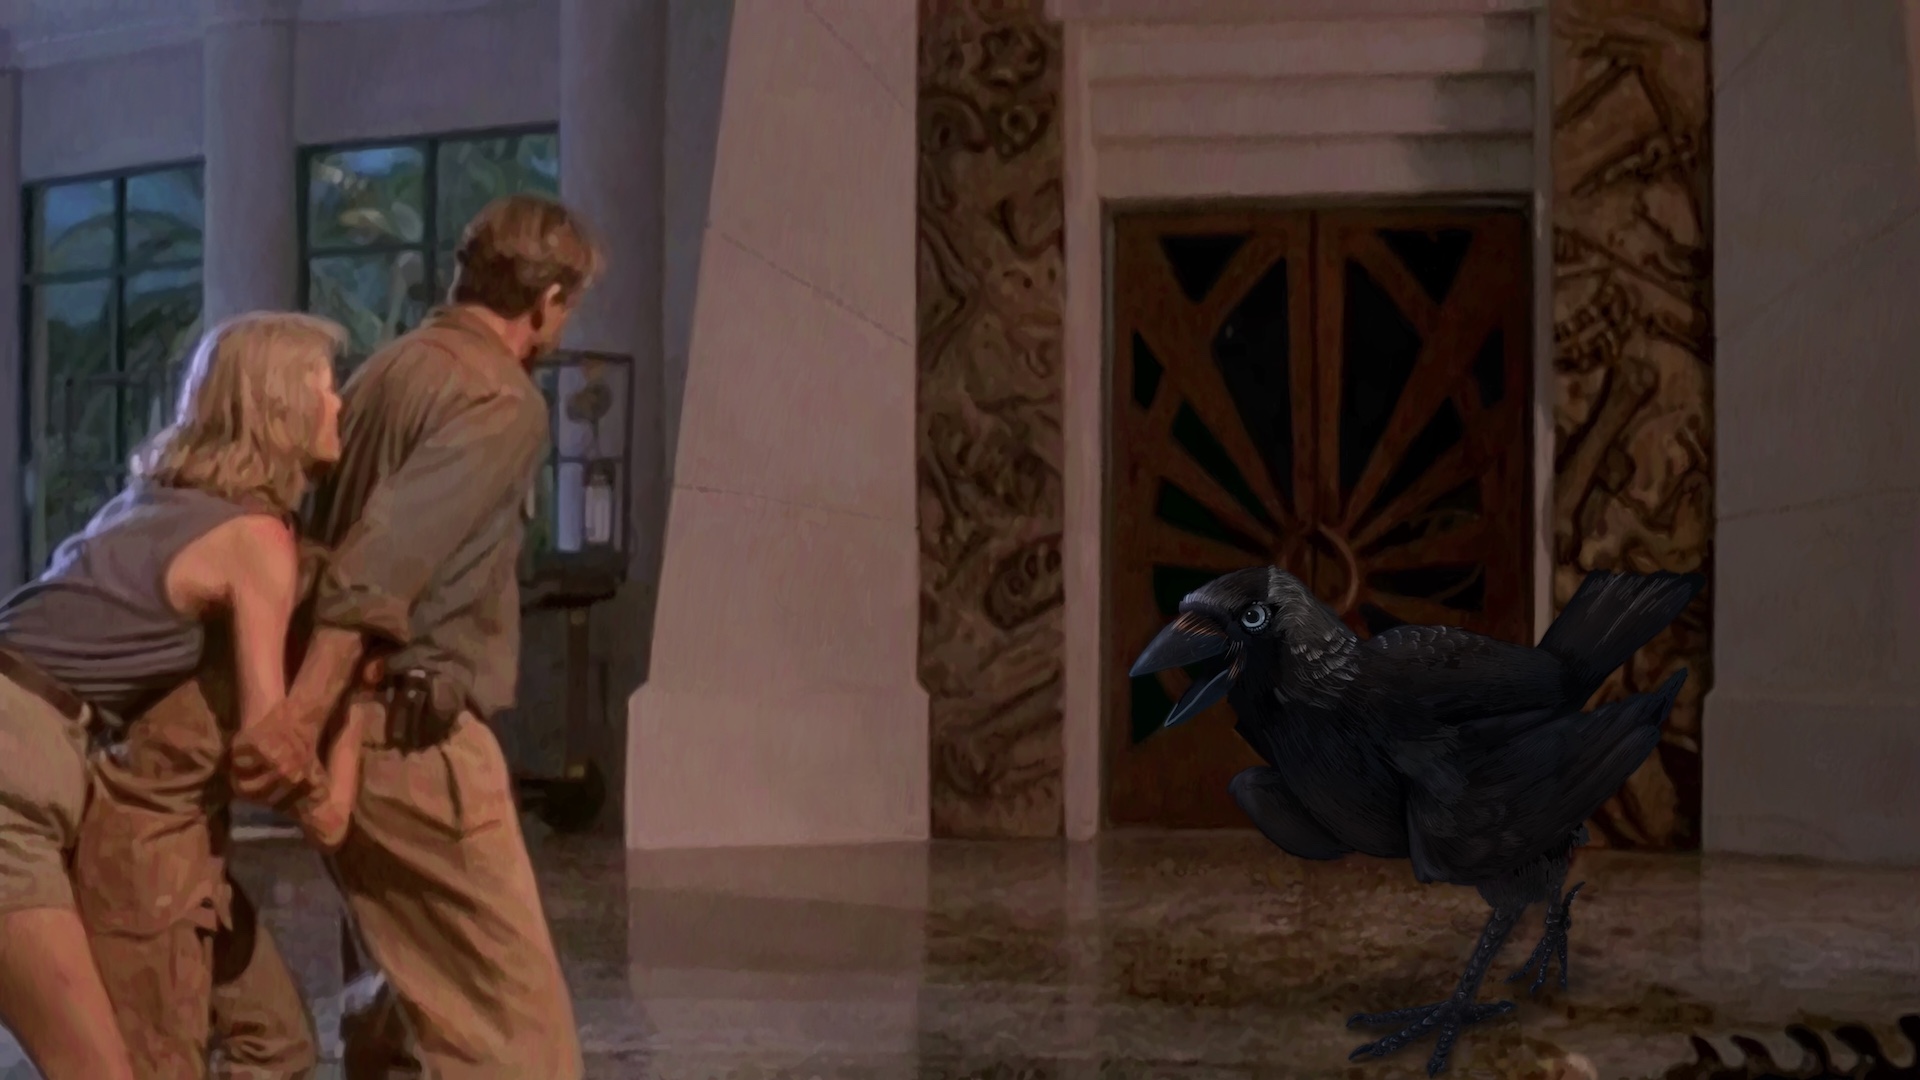 Digitally painted reproduction of of a frame from Jurassic Park, but instead of a velociraptor threatening the heroes in the visitor centre, it's a gaint jackdaw.'